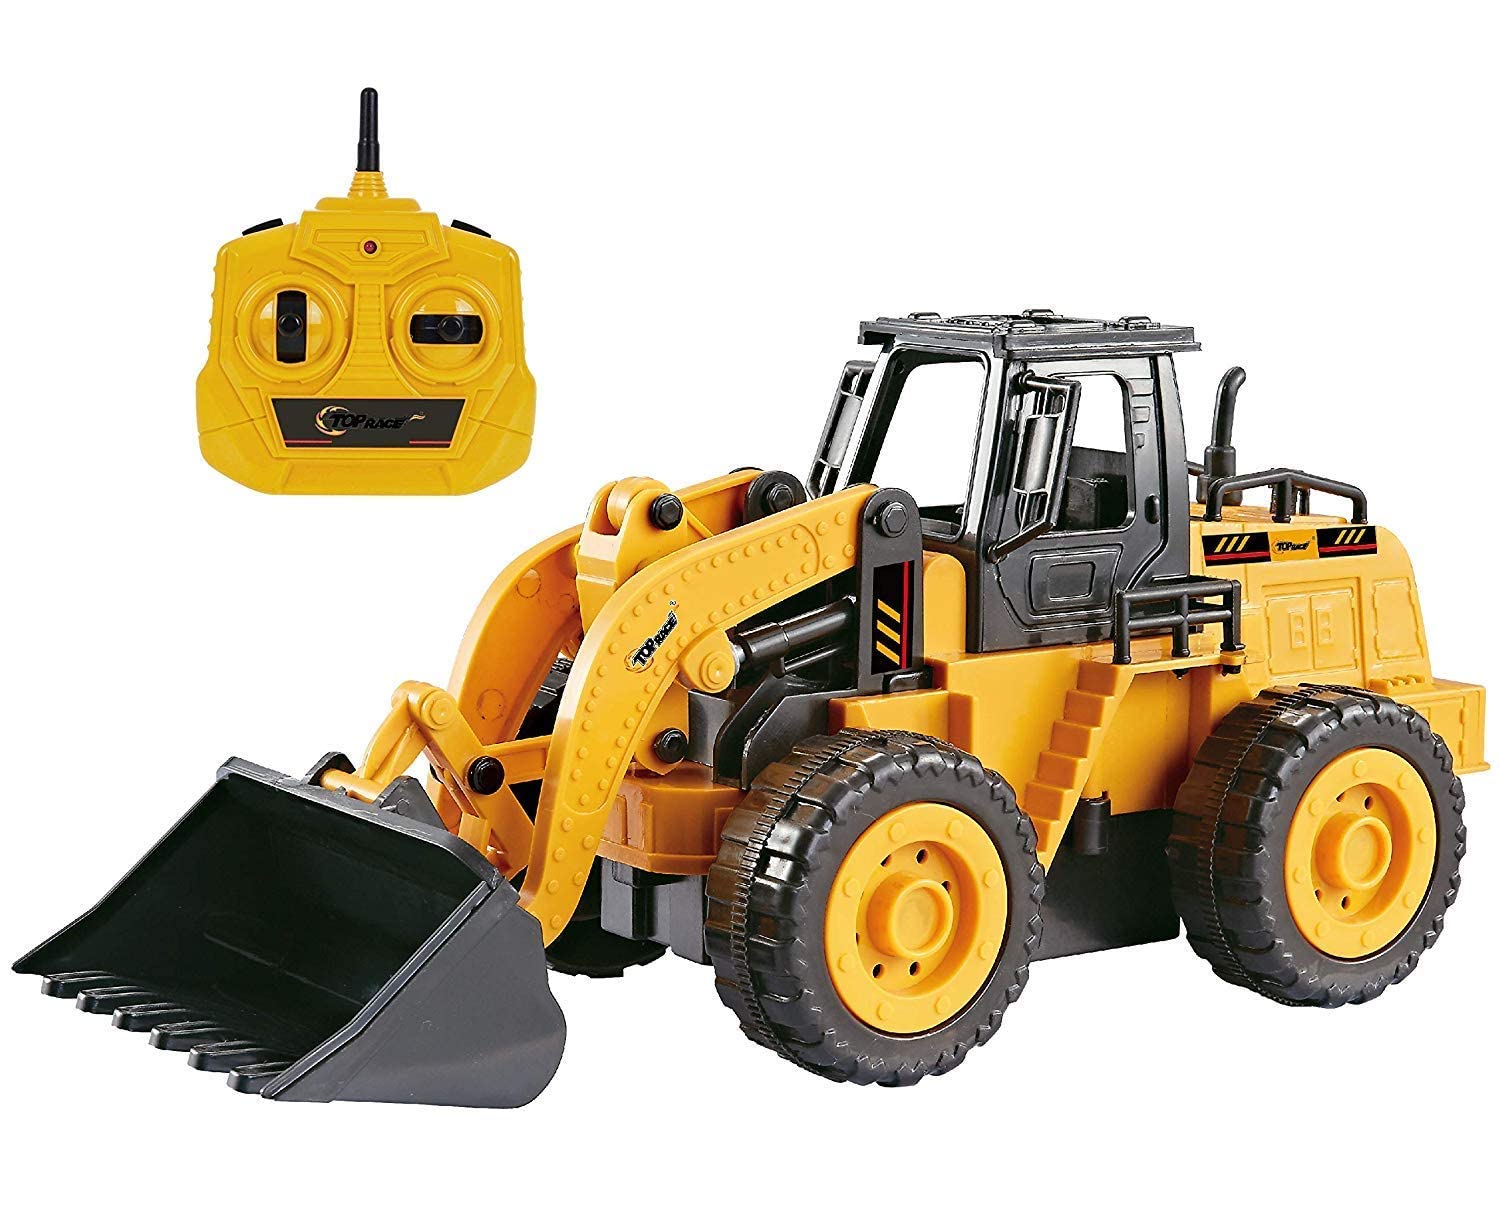 Top Race 8 inches RC Front Loader Toy Truck - Construction Toys for Kids - RC Excavator,Dump Truck,Sand Box Tractor Toys - 5 Cha